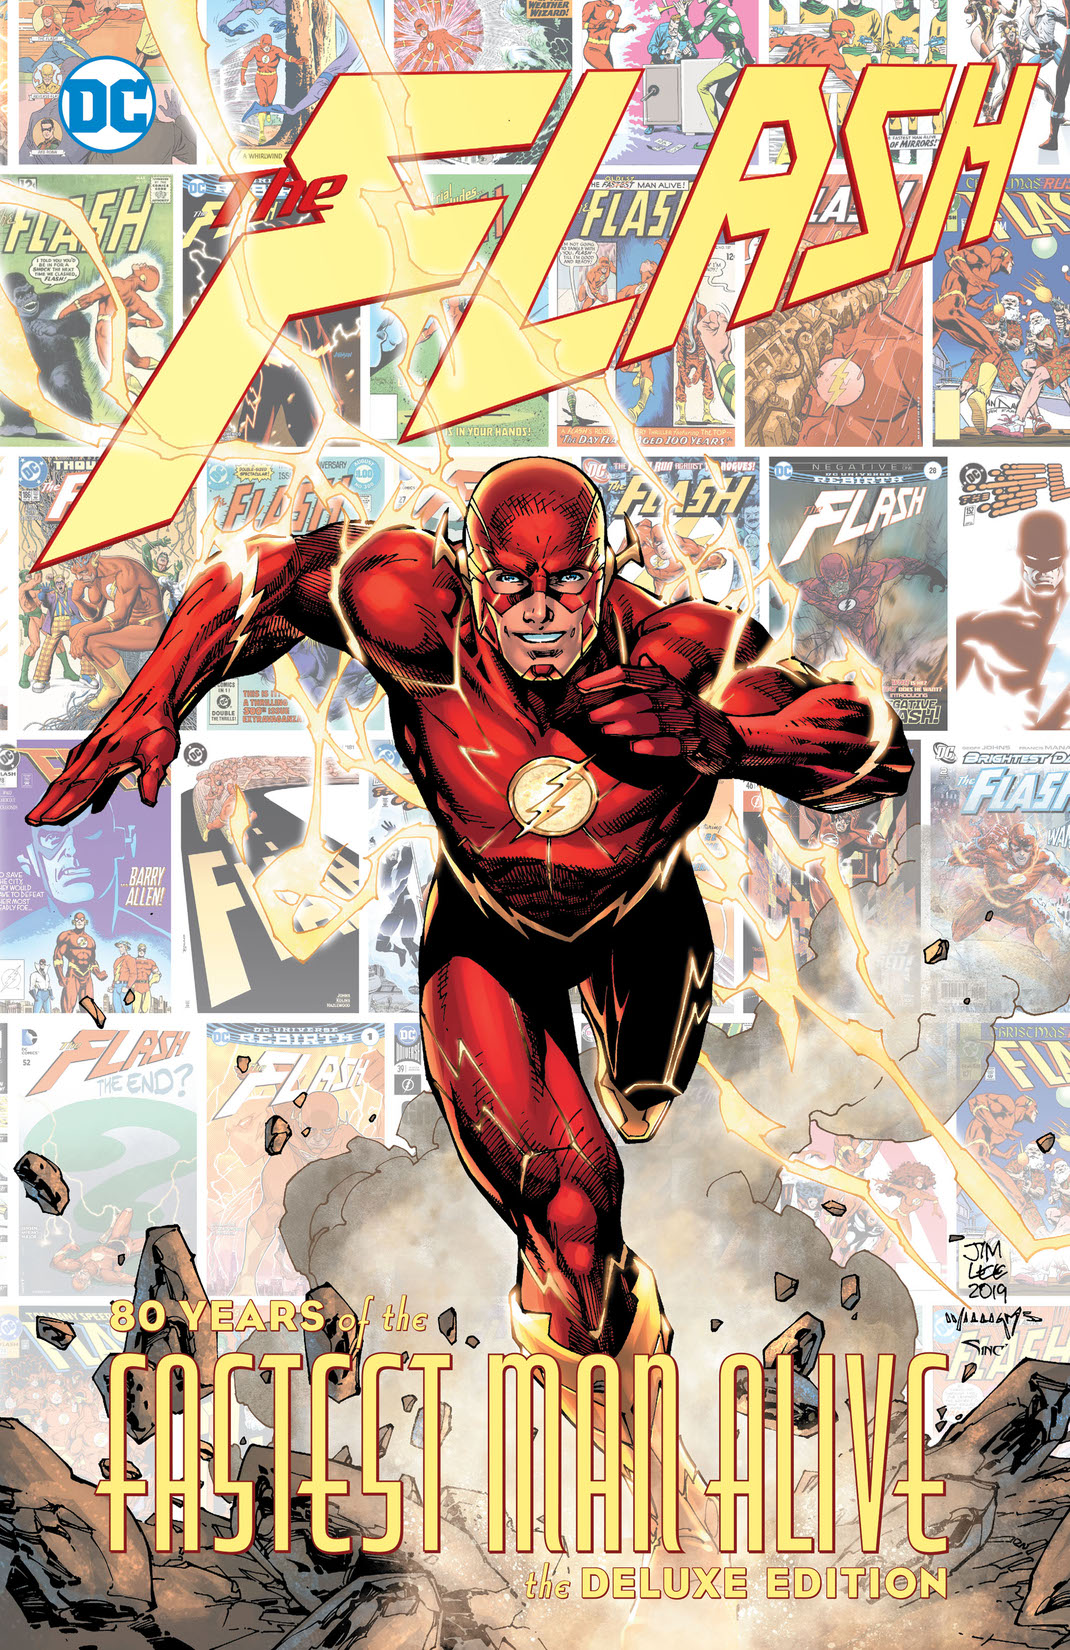 The Flash: 80 Years of the Fastest Man Alive preview images